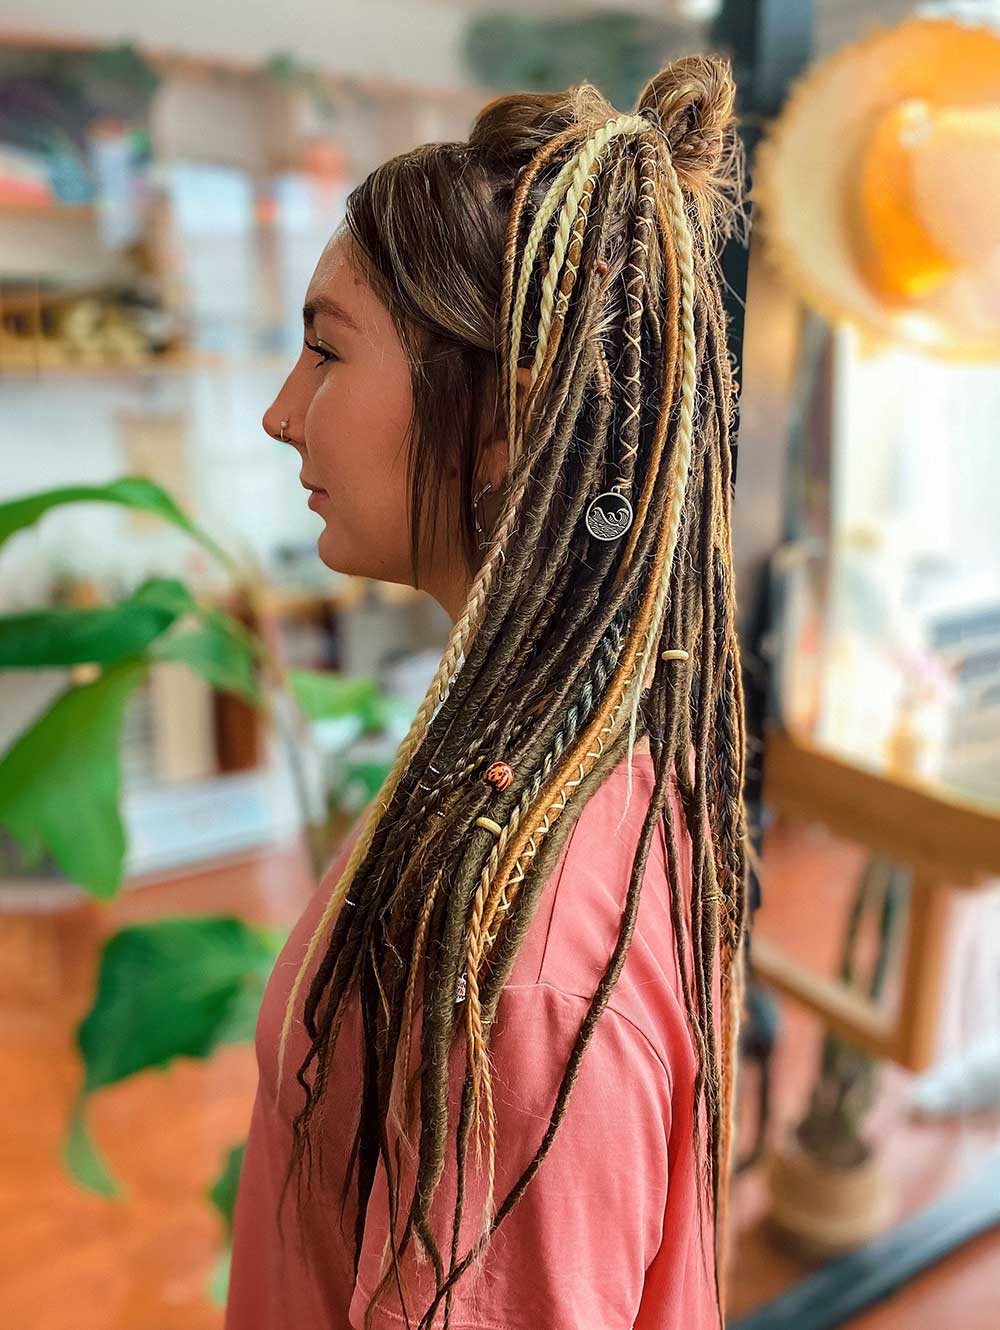 24" SE Thin 0.6cm Synthetic Dreadlock Extensions Handmade Fake Dreads